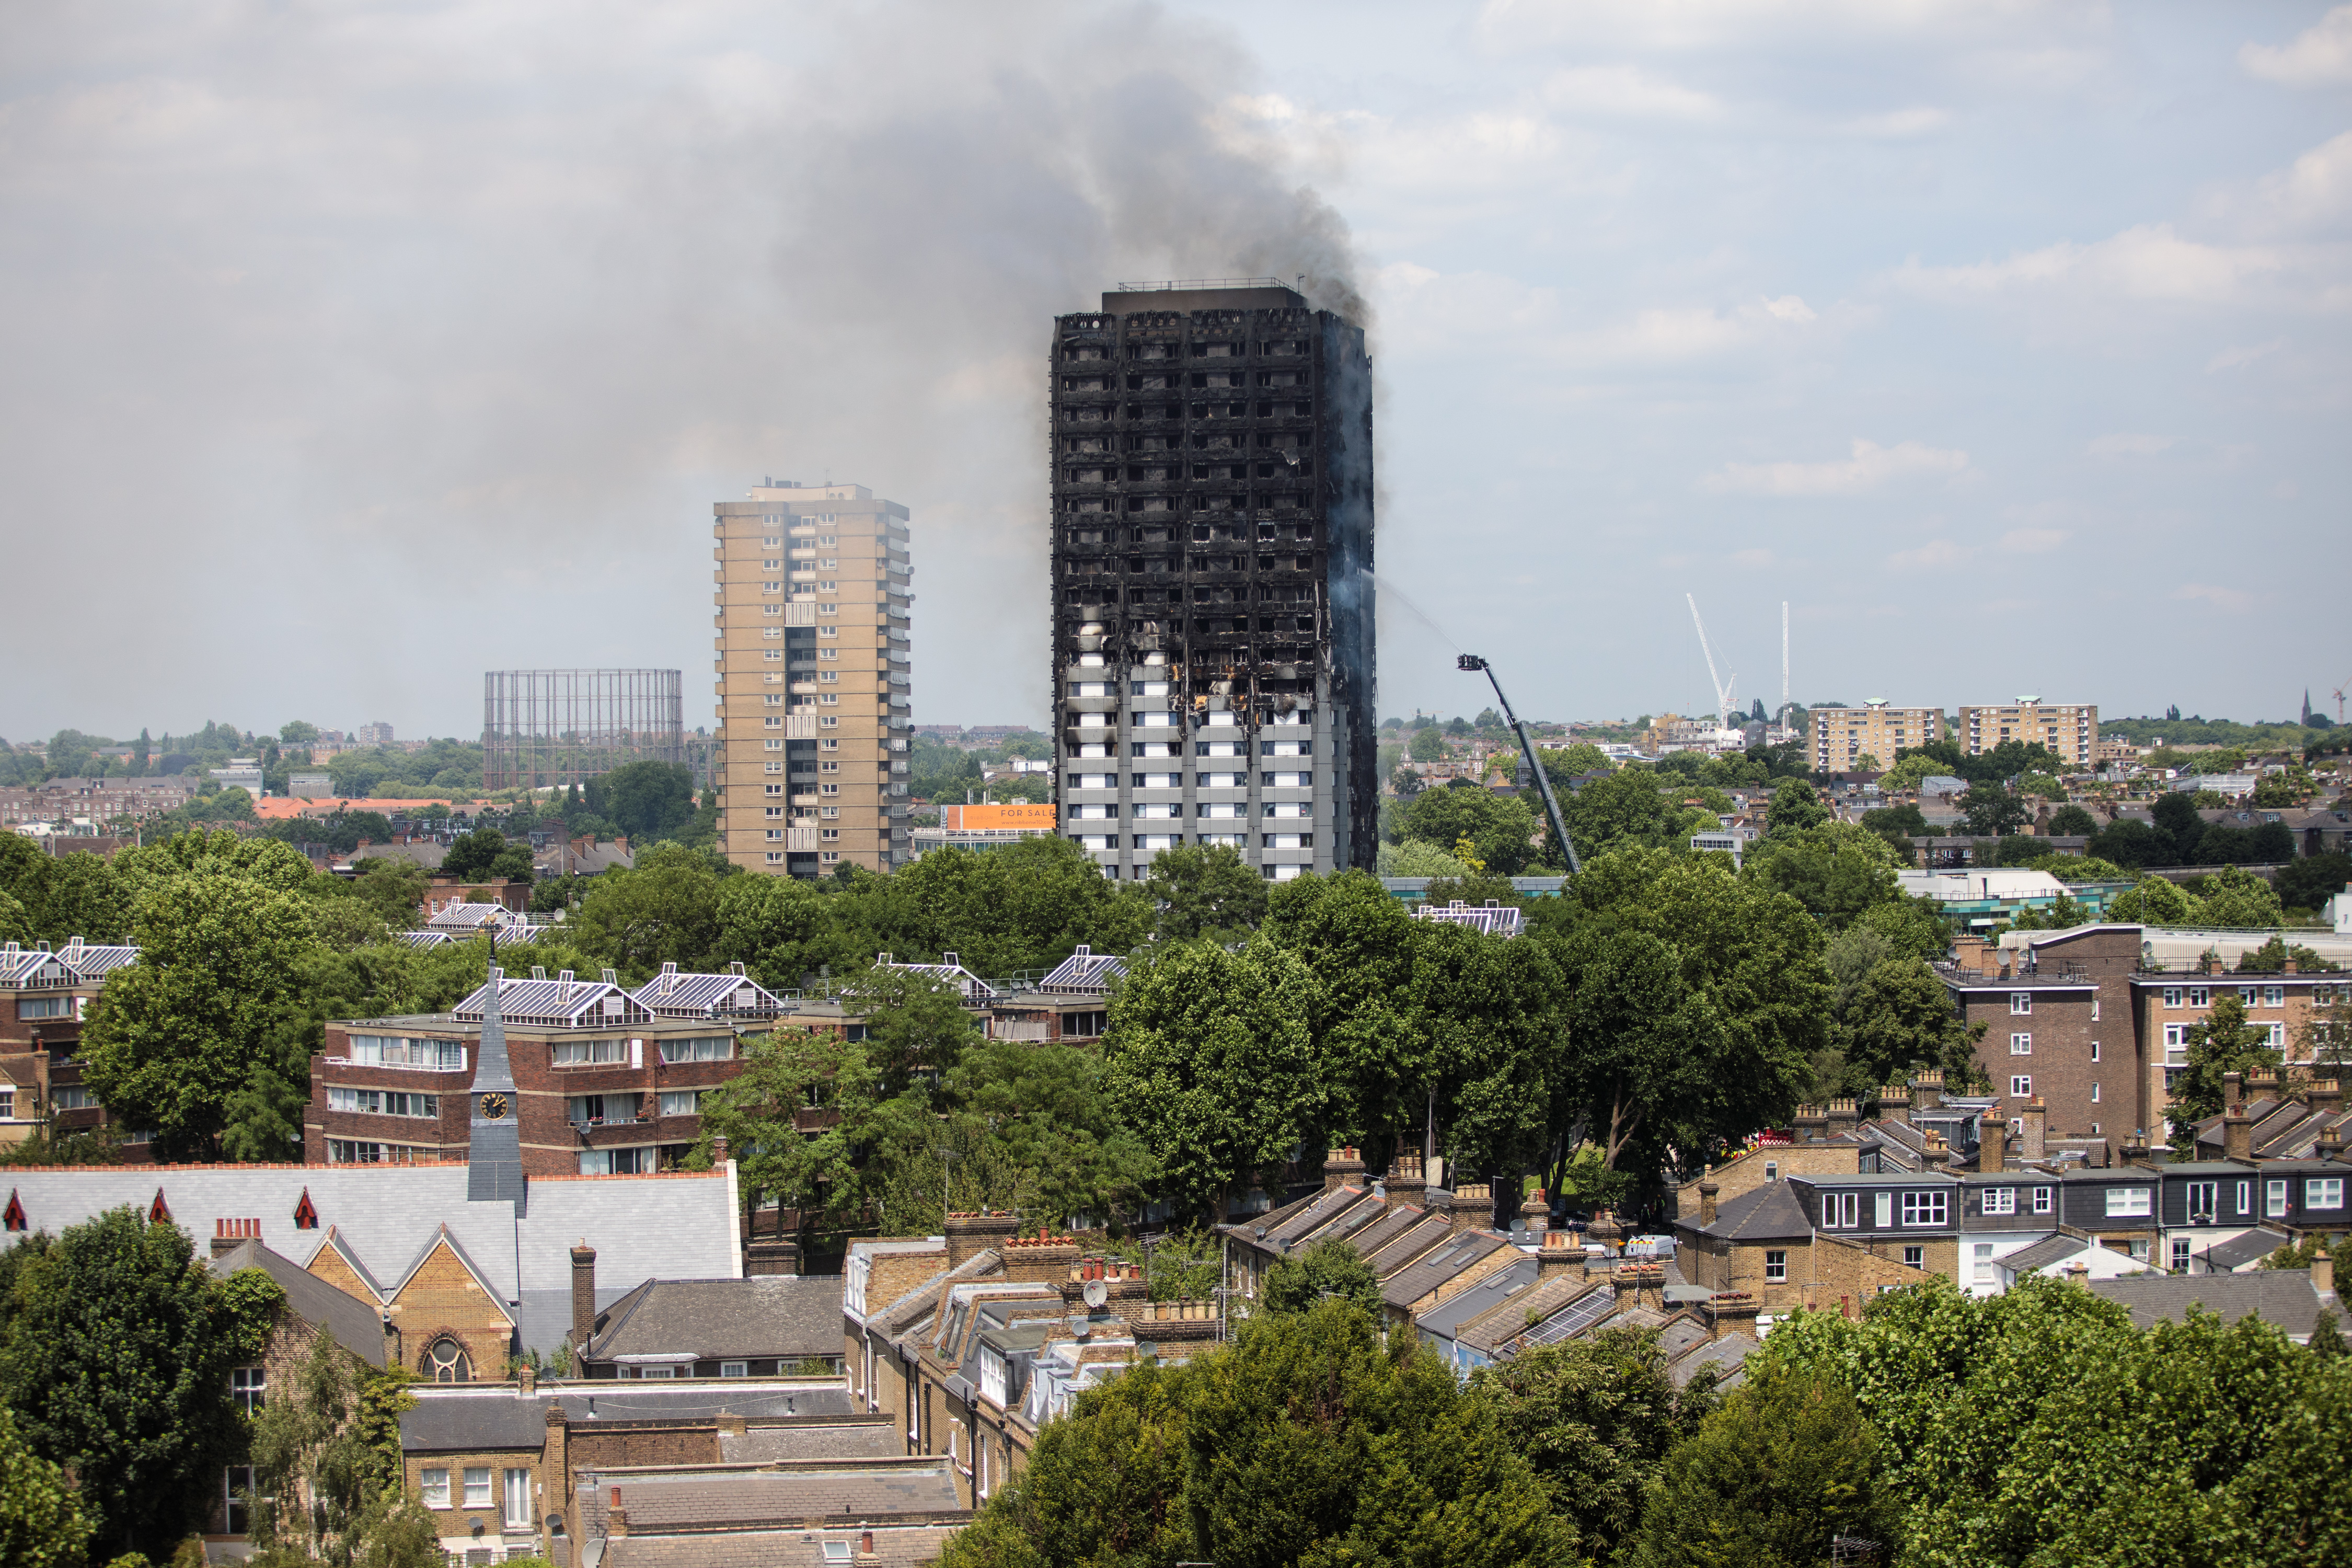 At Least Six Dead After Fire Rages Through London Tower Block